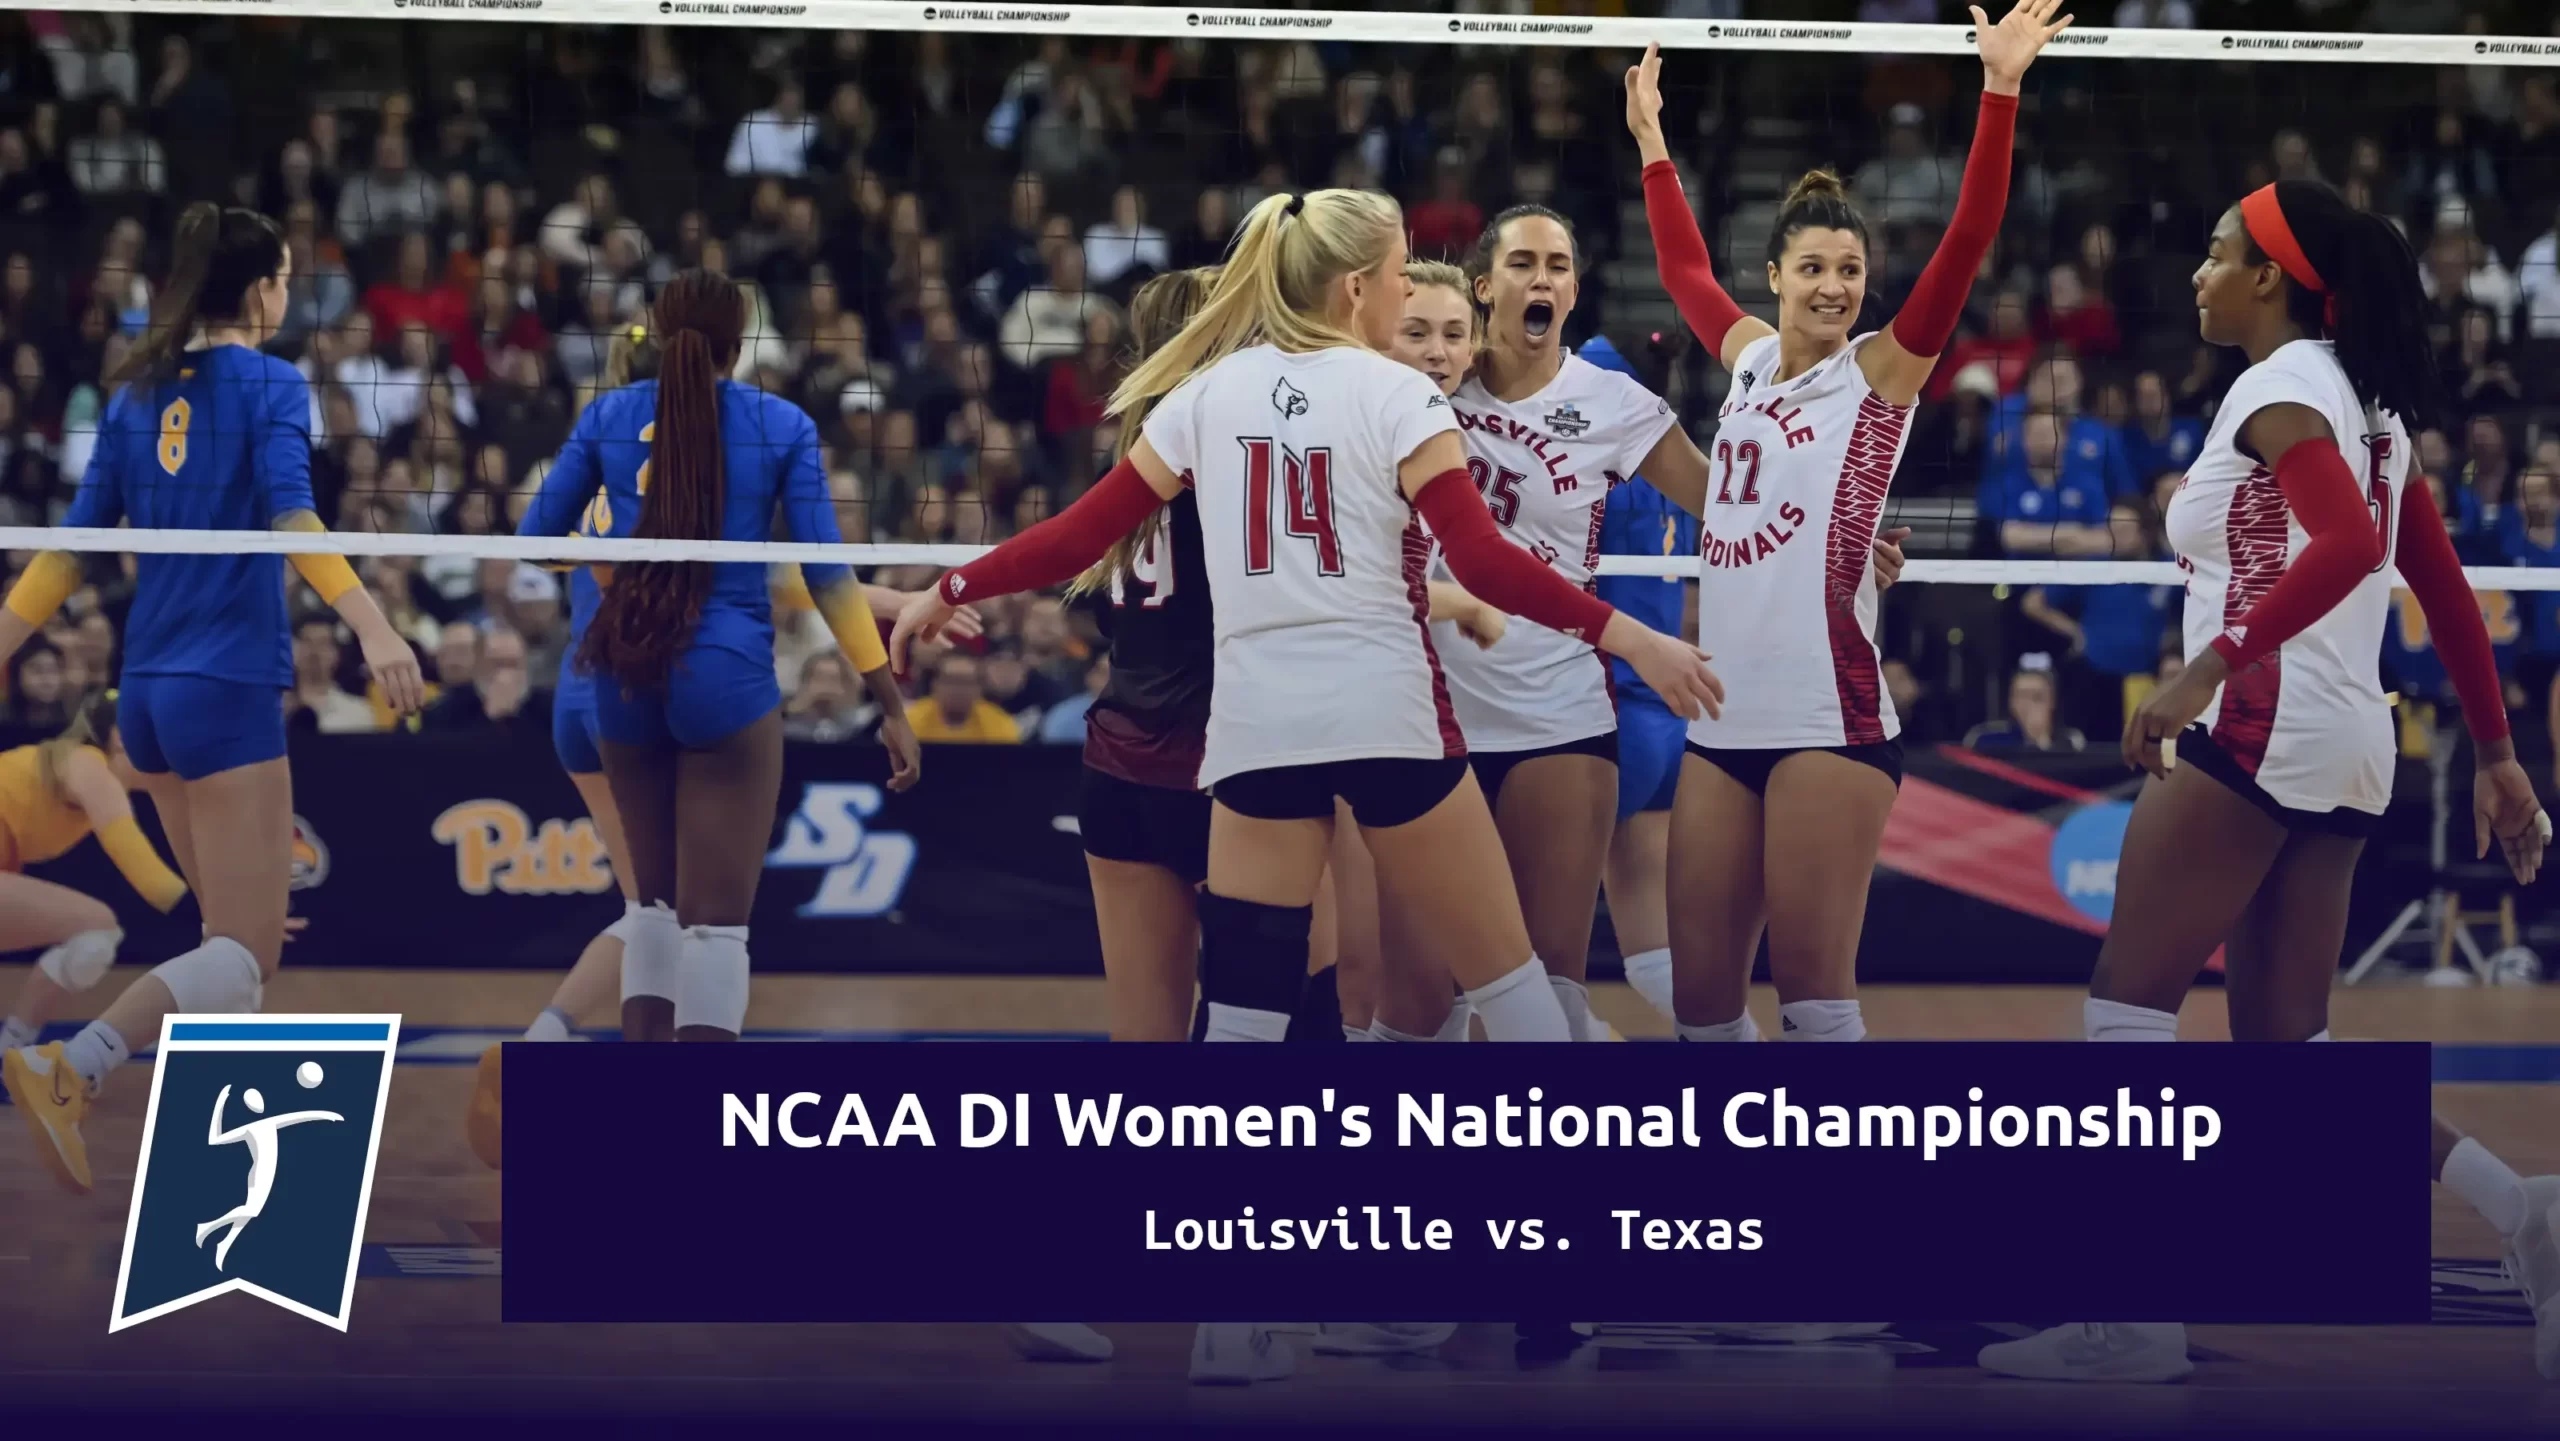 Louisville vs Texas: NCAA Division I Women's Volleyball National Championship featured image containing hockey players celebrating score